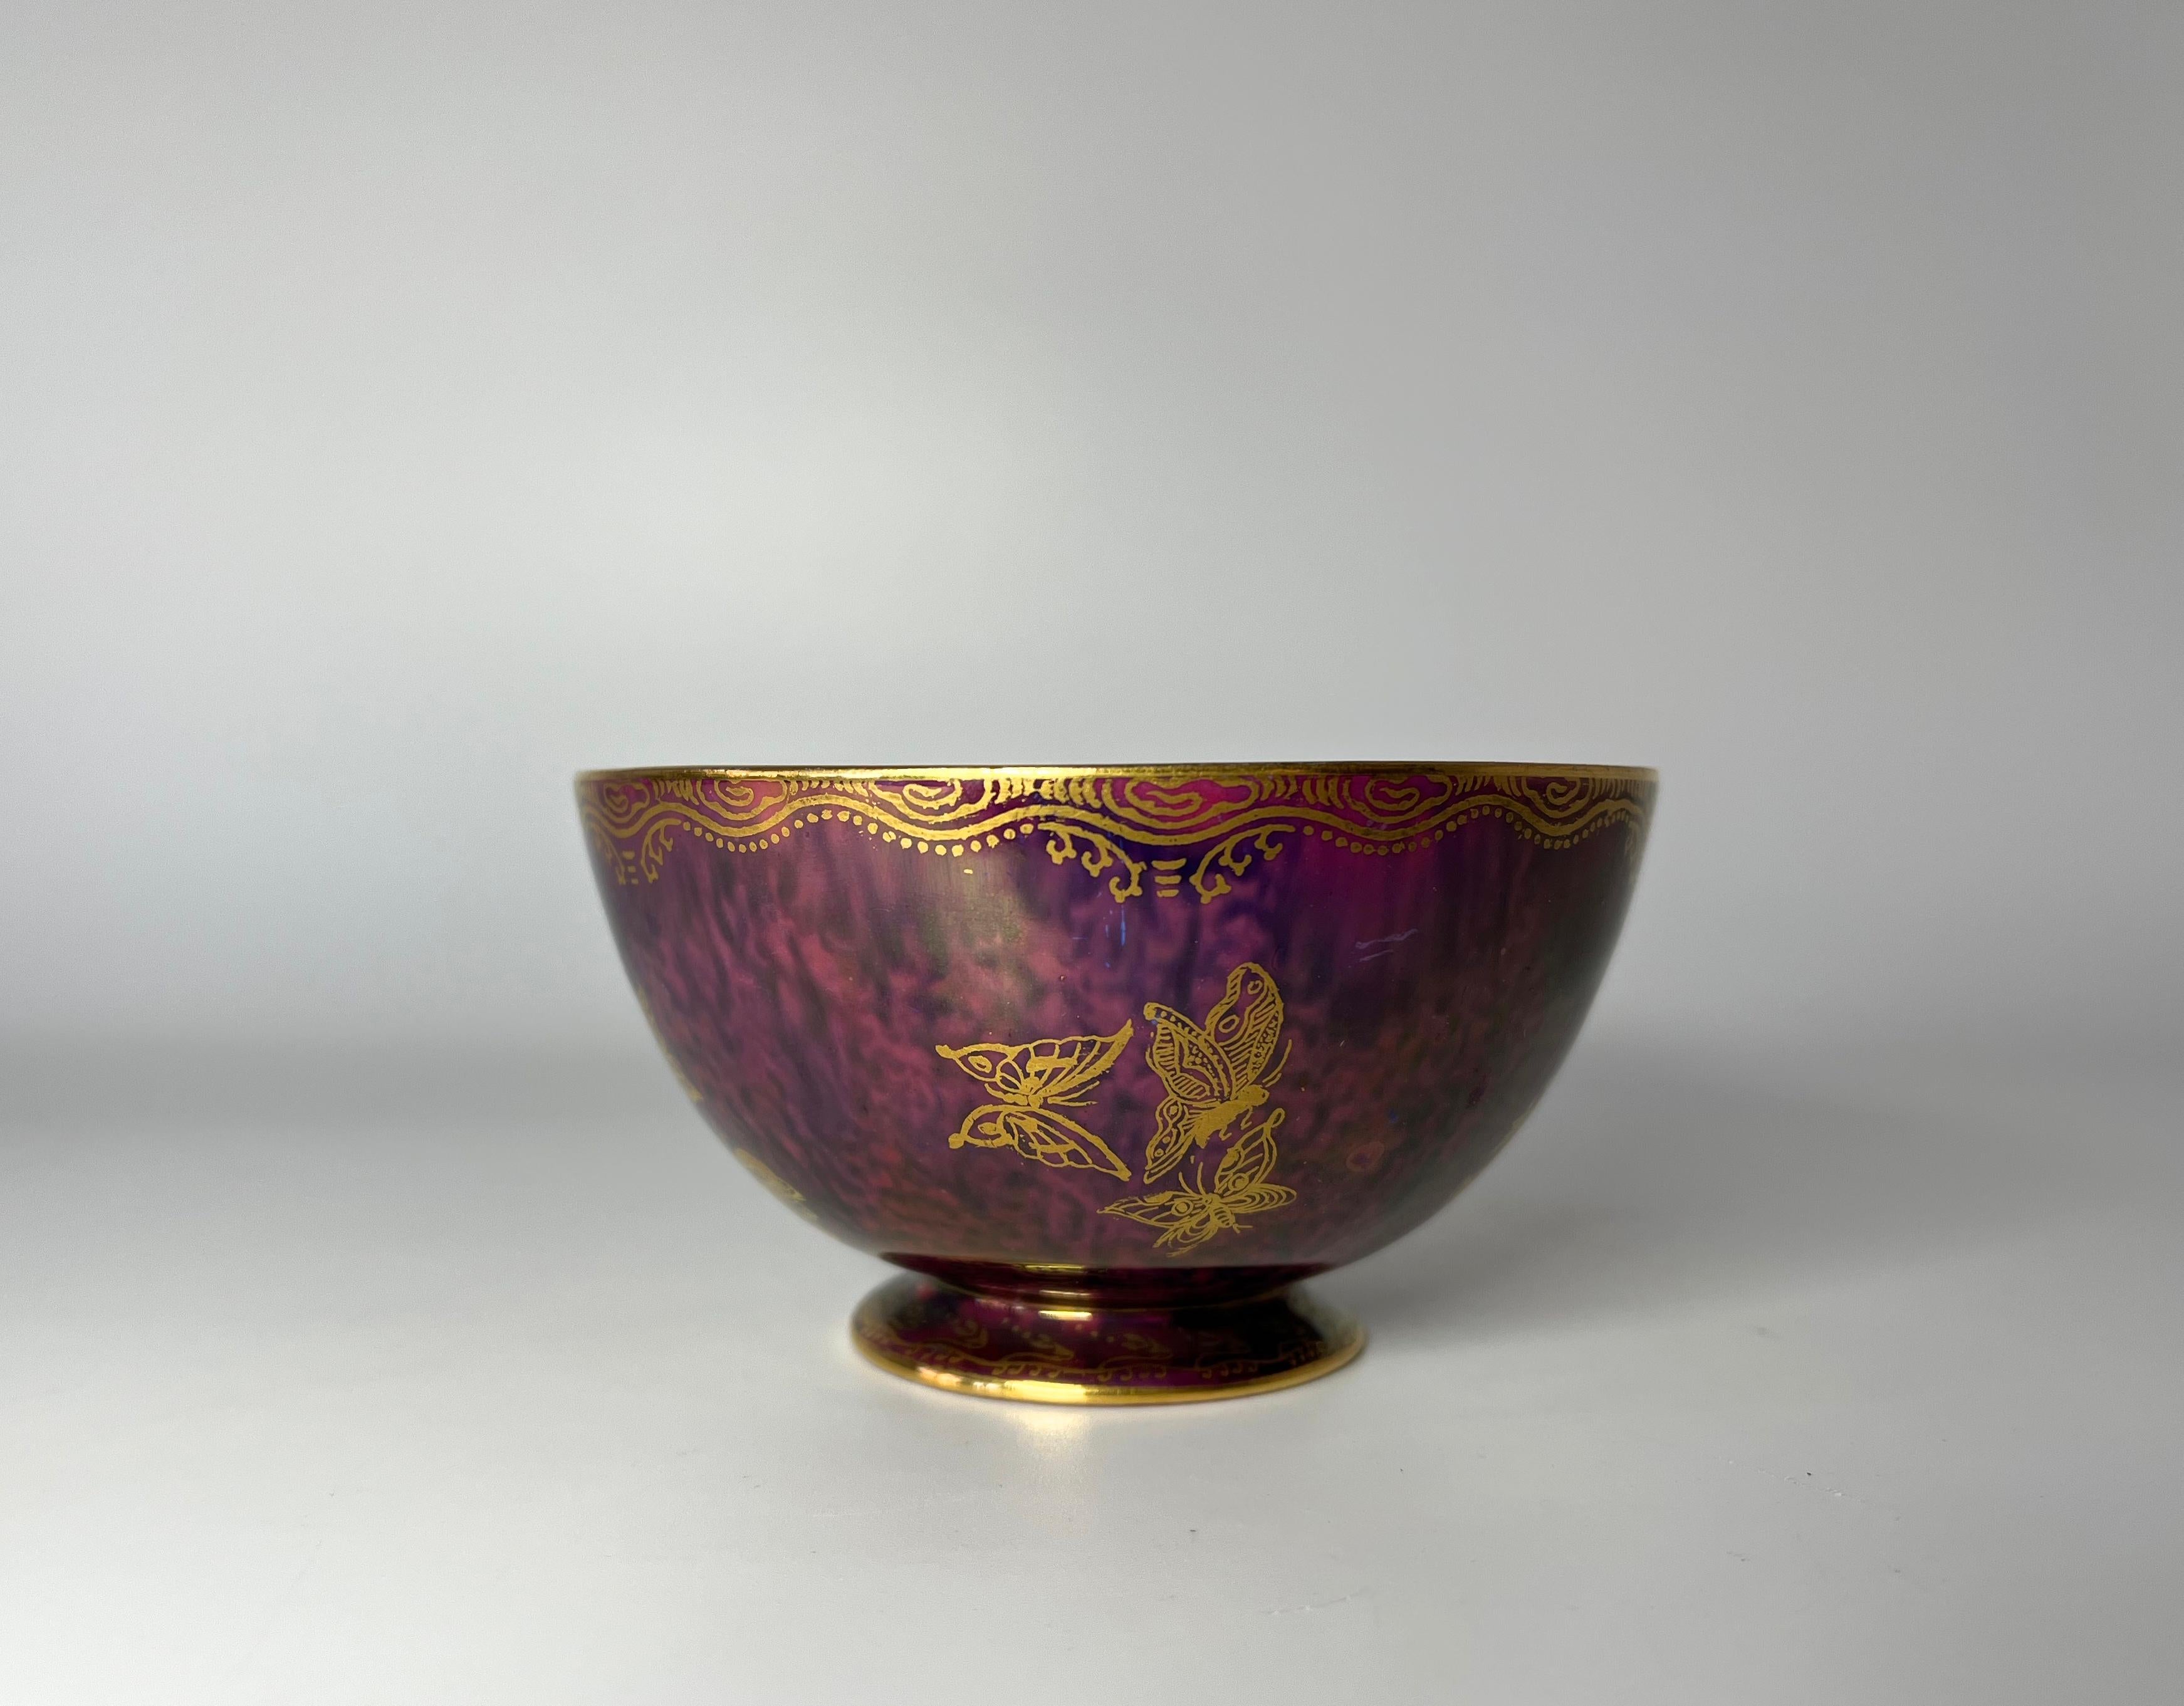 Exquisite ruby Ordinary lustre york cup by Daisy Makeig Jones for Wedgwood, England.
The interior of this delightful piece has a vibrantly coloured butterfly on a pale green mother of pearl background, with gilded interior patterning.
Rich ruby red